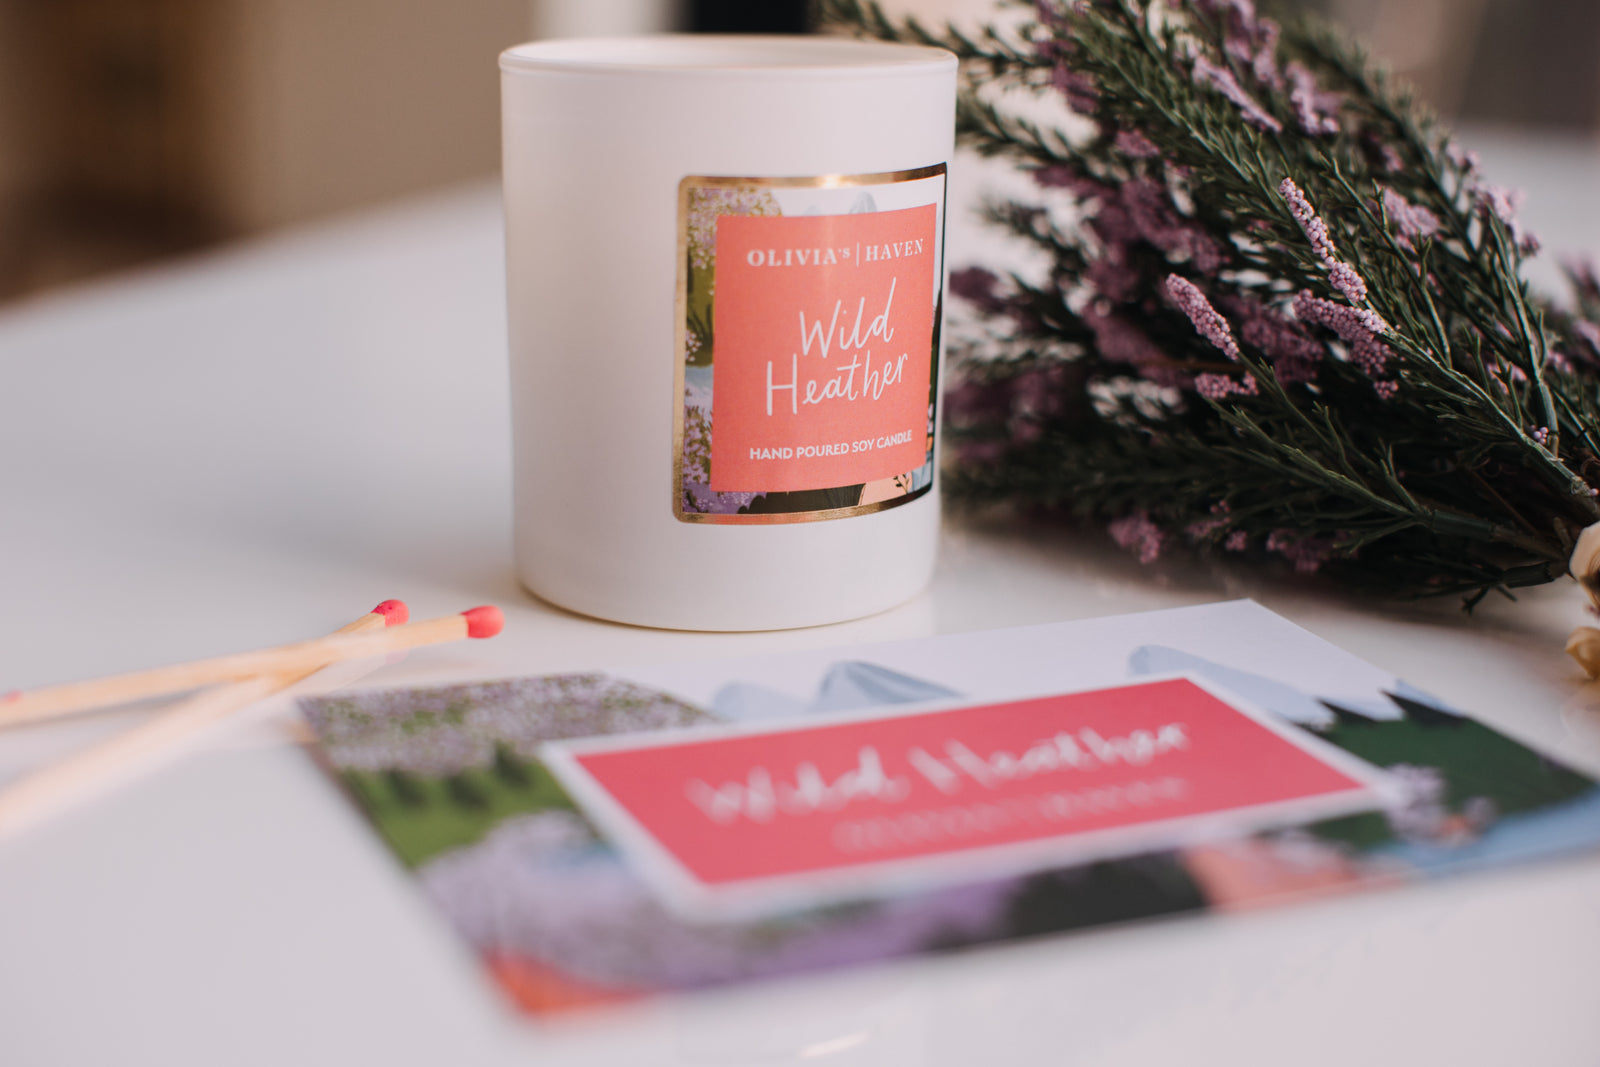 New LIMITED EDITION Candle - Wild Heather